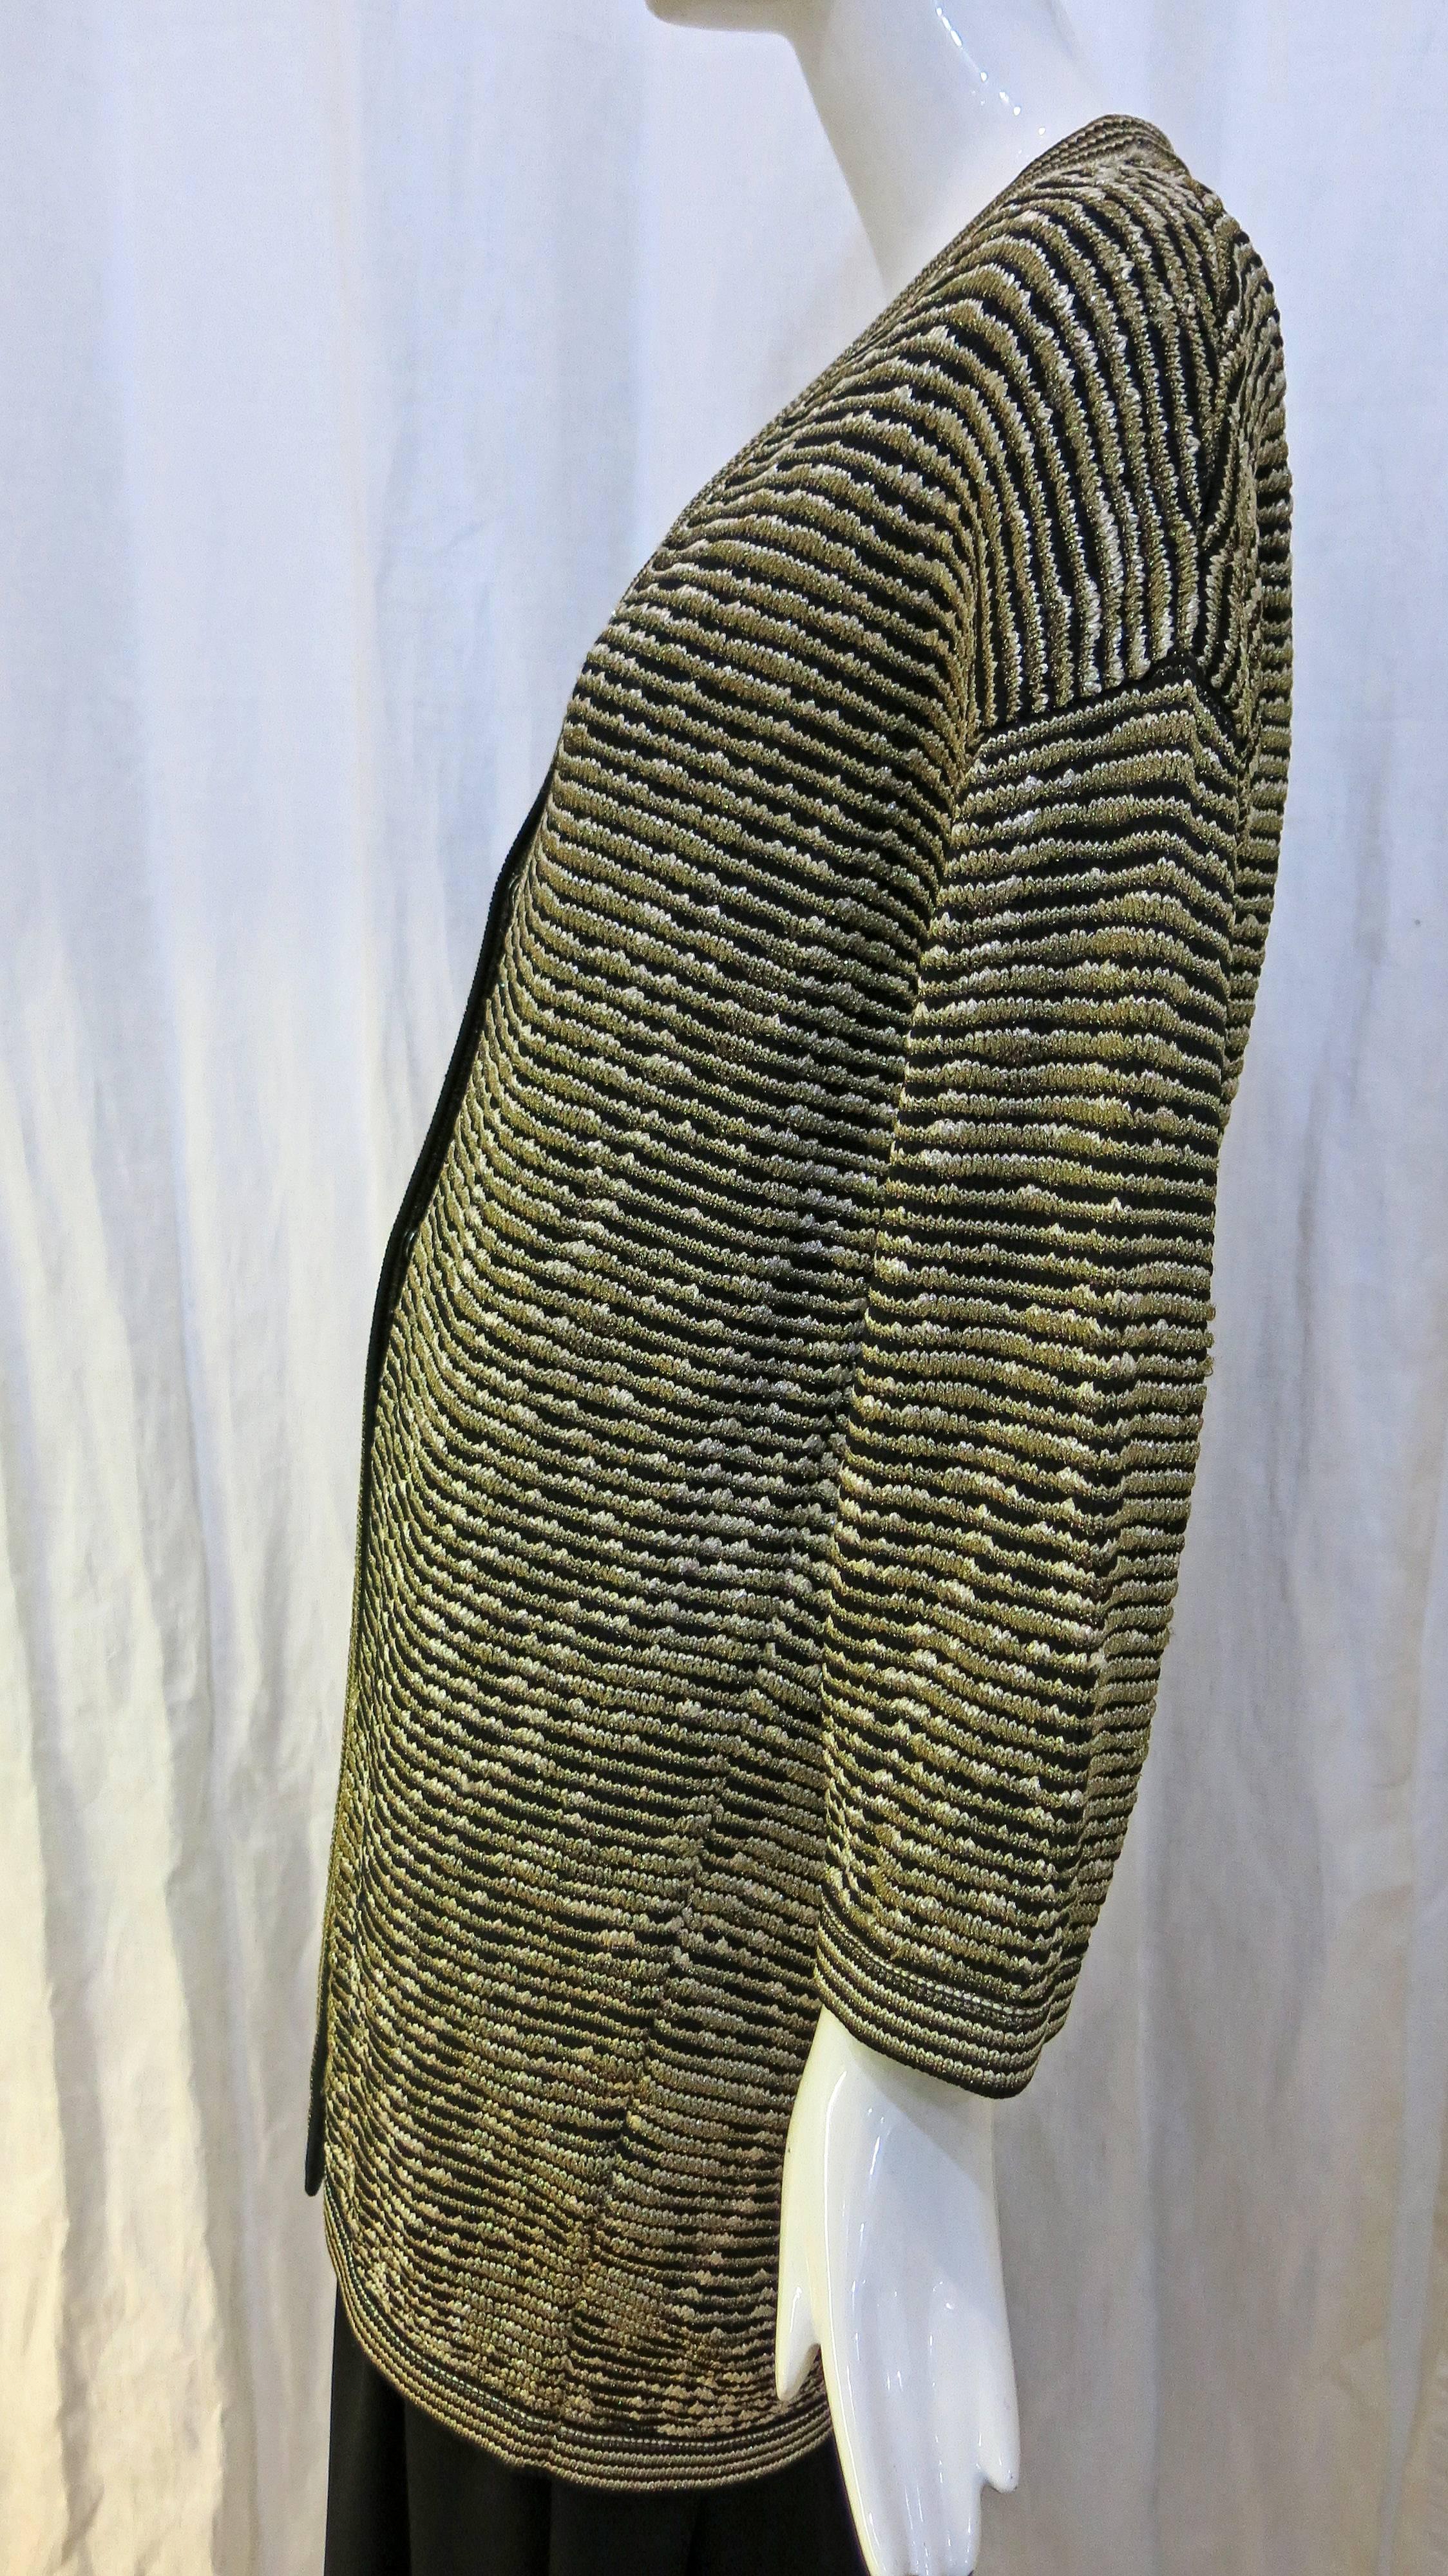 Classic Missoni Chevron stitch in black and metallic gold. Design is an oversized cardigan with two snap buttons. Buttons start almost halfway down the sweater. The sleeves are on the shorter side (hit at wrist length). This would look great over a